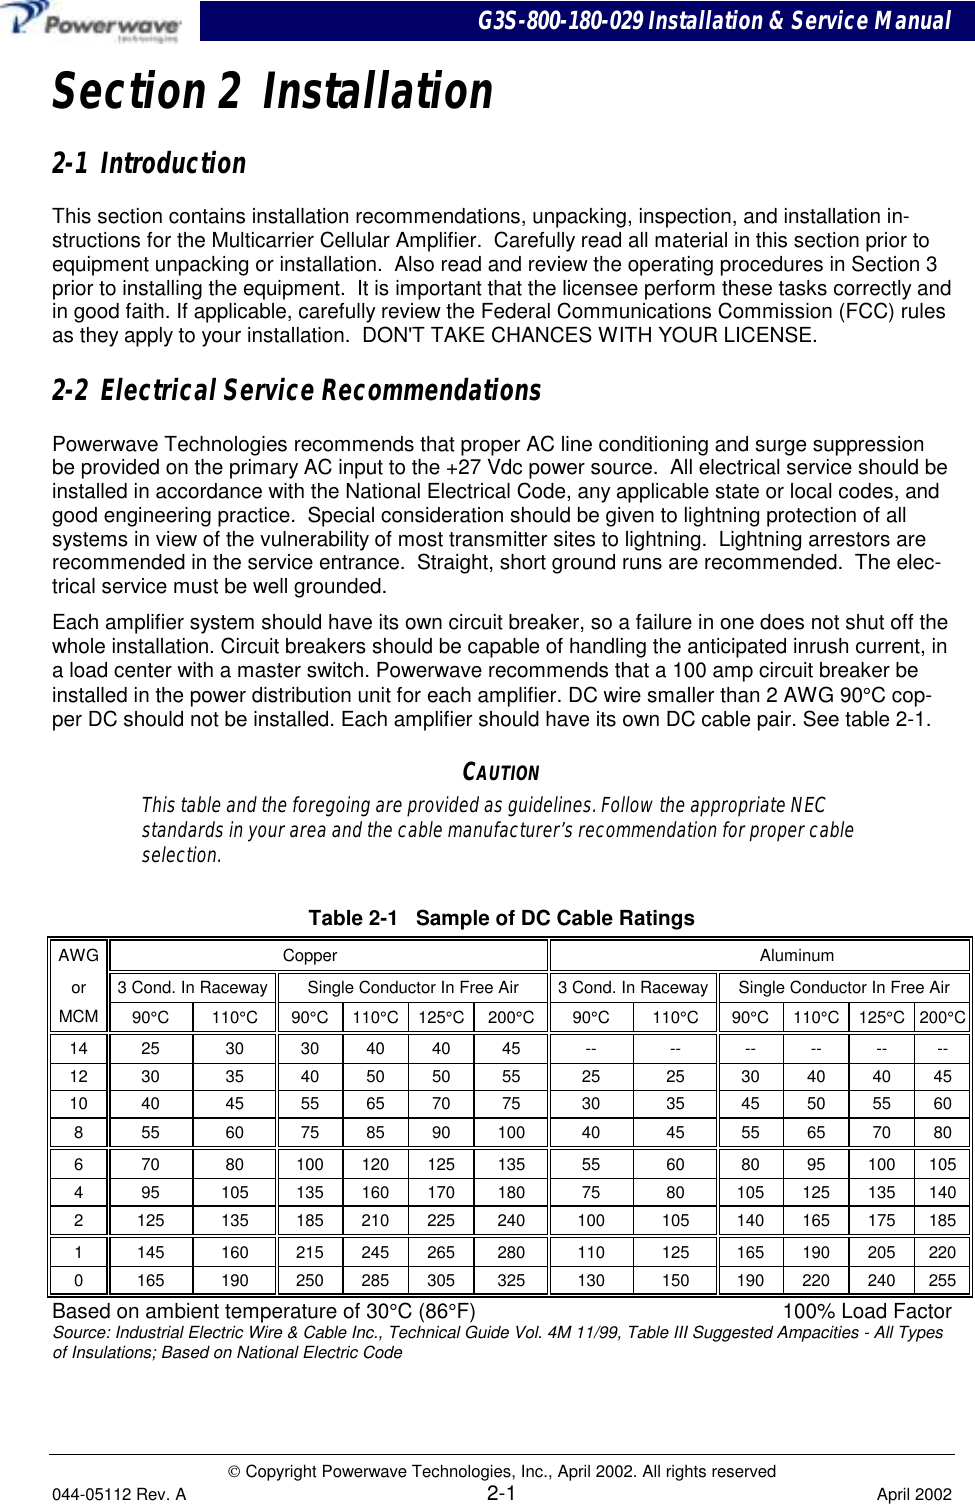 G3S-800-180-029 Installation &amp; Service Manual Copyright Powerwave Technologies, Inc., April 2002. All rights reserved044-05112 Rev. A 2-1 April 2002Section 2  Installation2-1  IntroductionThis section contains installation recommendations, unpacking, inspection, and installation in-structions for the Multicarrier Cellular Amplifier.  Carefully read all material in this section prior toequipment unpacking or installation.  Also read and review the operating procedures in Section 3prior to installing the equipment.  It is important that the licensee perform these tasks correctly andin good faith. If applicable, carefully review the Federal Communications Commission (FCC) rulesas they apply to your installation.  DON&apos;T TAKE CHANCES WITH YOUR LICENSE.2-2  Electrical Service RecommendationsPowerwave Technologies recommends that proper AC line conditioning and surge suppressionbe provided on the primary AC input to the +27 Vdc power source.  All electrical service should beinstalled in accordance with the National Electrical Code, any applicable state or local codes, andgood engineering practice.  Special consideration should be given to lightning protection of allsystems in view of the vulnerability of most transmitter sites to lightning.  Lightning arrestors arerecommended in the service entrance.  Straight, short ground runs are recommended.  The elec-trical service must be well grounded.Each amplifier system should have its own circuit breaker, so a failure in one does not shut off thewhole installation. Circuit breakers should be capable of handling the anticipated inrush current, ina load center with a master switch. Powerwave recommends that a 100 amp circuit breaker beinstalled in the power distribution unit for each amplifier. DC wire smaller than 2 AWG 90°C cop-per DC should not be installed. Each amplifier should have its own DC cable pair. See table 2-1.CAUTIONThis table and the foregoing are provided as guidelines. Follow the appropriate NECstandards in your area and the cable manufacturer’s recommendation for proper cableselection.Table 2-1   Sample of DC Cable RatingsAWG Copper Aluminumor 3 Cond. In Raceway Single Conductor In Free Air 3 Cond. In Raceway Single Conductor In Free AirMCM 90°C 110°C90°C 110°C 125°C 200°C90°C 110°C90°C 110°C 125°C 200°C14 25 30 30 40 40 45 -- -- -- -- -- --12 30 35 40 50 50 55 25 25 30 40 40 4510 40 45 55 65 70 75 30 35 45 50 55 608 55 60 75 85 90 100 40 45 55 65 70 806 70 80 100 120 125 135 55 60 80 95 100 1054 95 105 135 160 170 180 75 80 105 125 135 1402 125 135 185 210 225 240 100 105 140 165 175 1851 145 160 215 245 265 280 110 125 165 190 205 2200 165 190 250 285 305 325 130 150 190 220 240 255Based on ambient temperature of 30°C (86°F) 100% Load FactorSource: Industrial Electric Wire &amp; Cable Inc., Technical Guide Vol. 4M 11/99, Table III Suggested Ampacities - All Typesof Insulations; Based on National Electric Code